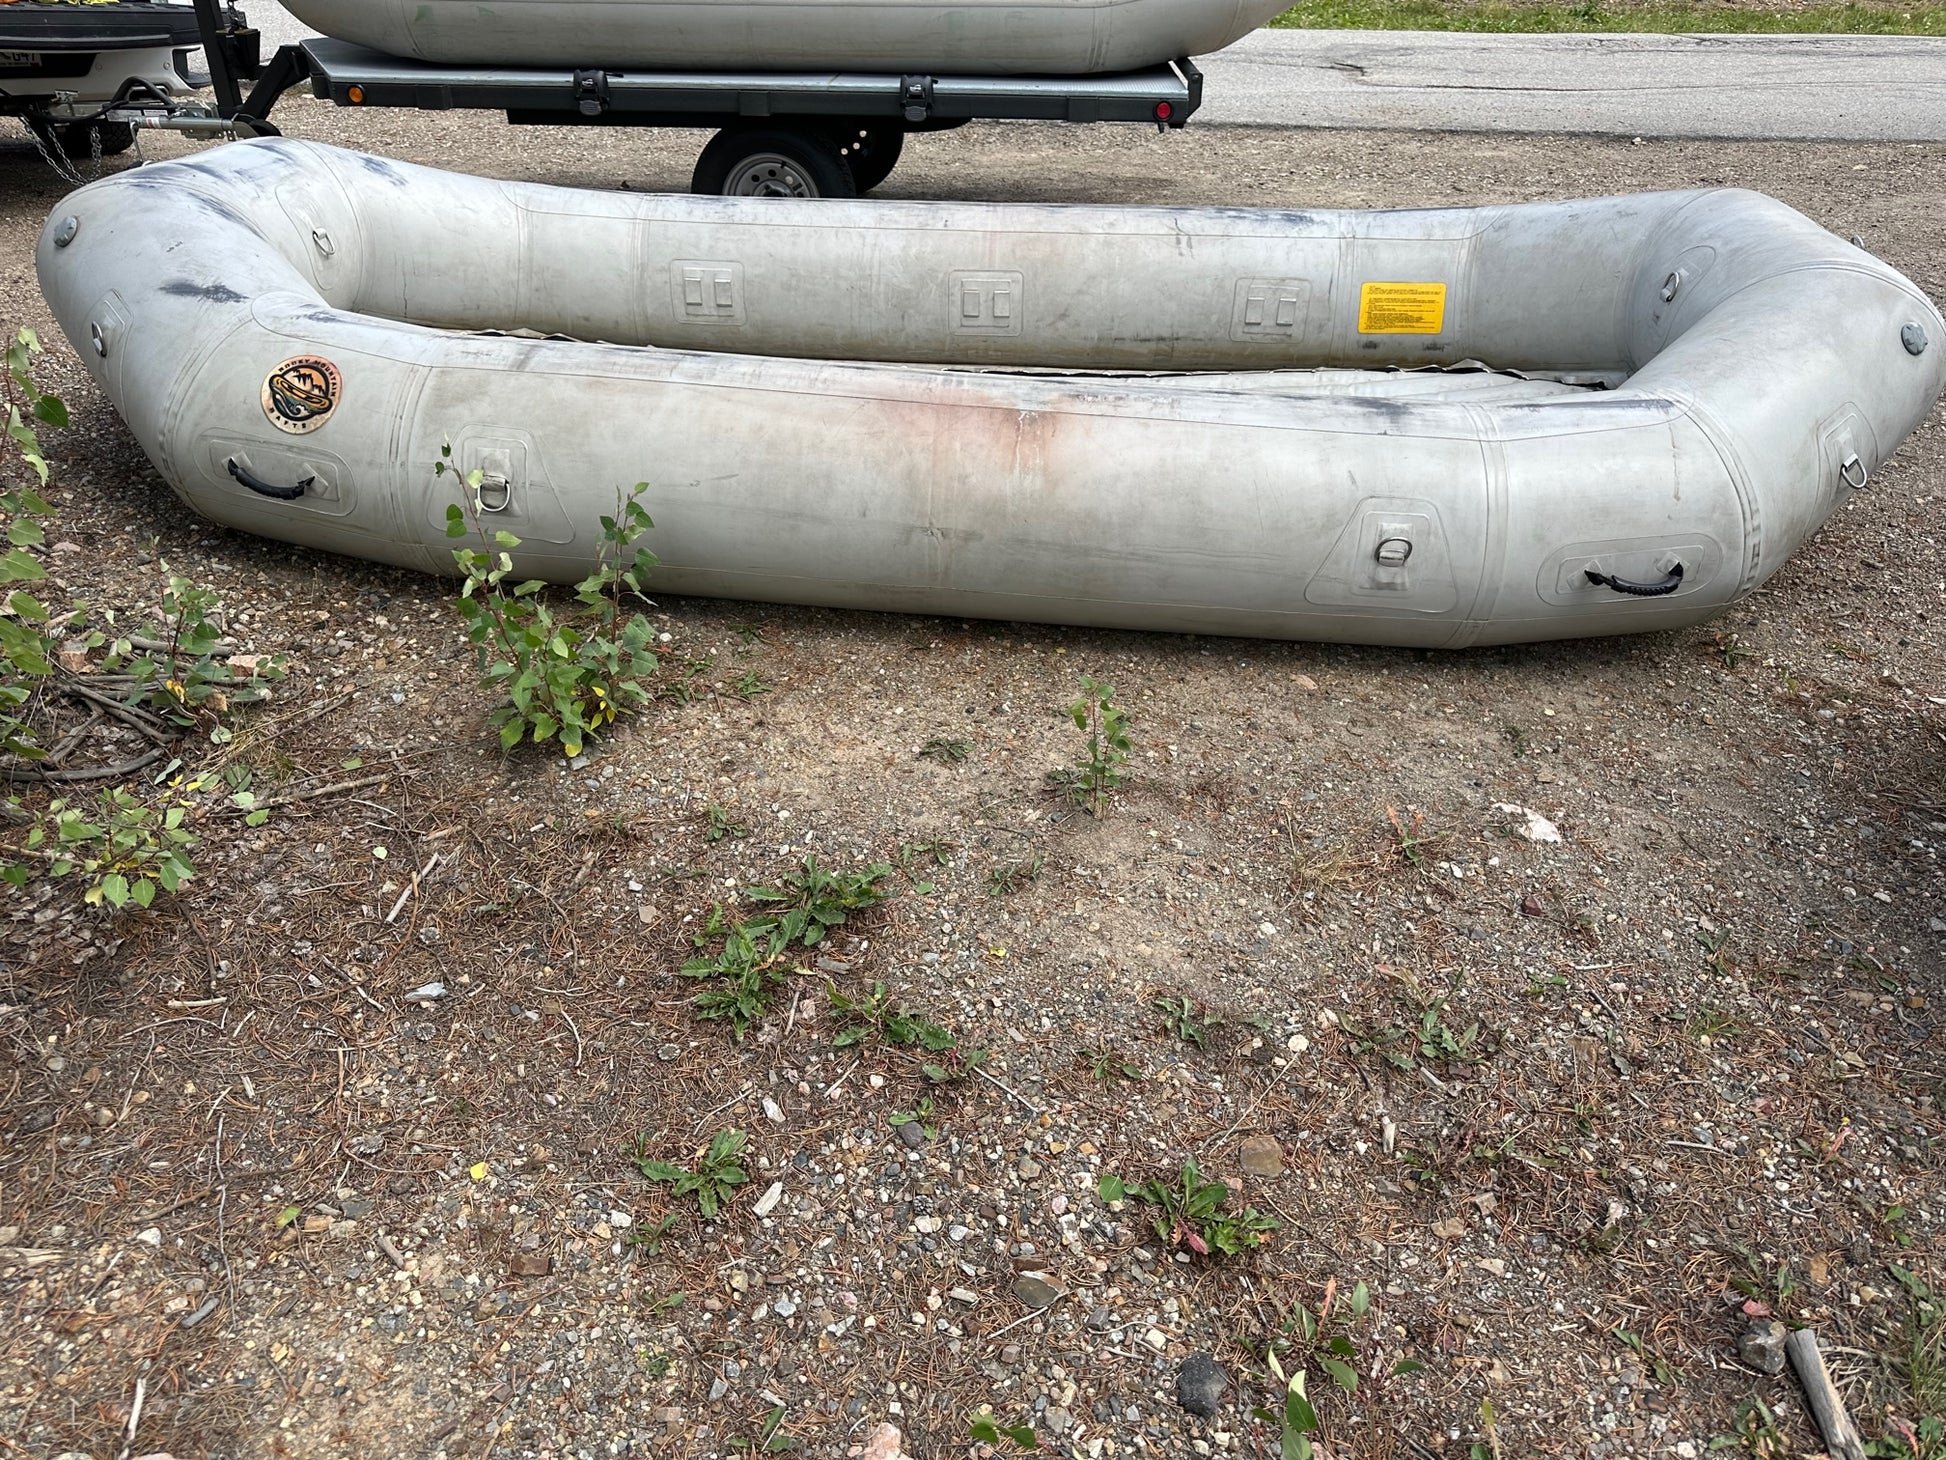 A Used 14' Rocky Mountain Raft in fair condition sitting next to a trailer.